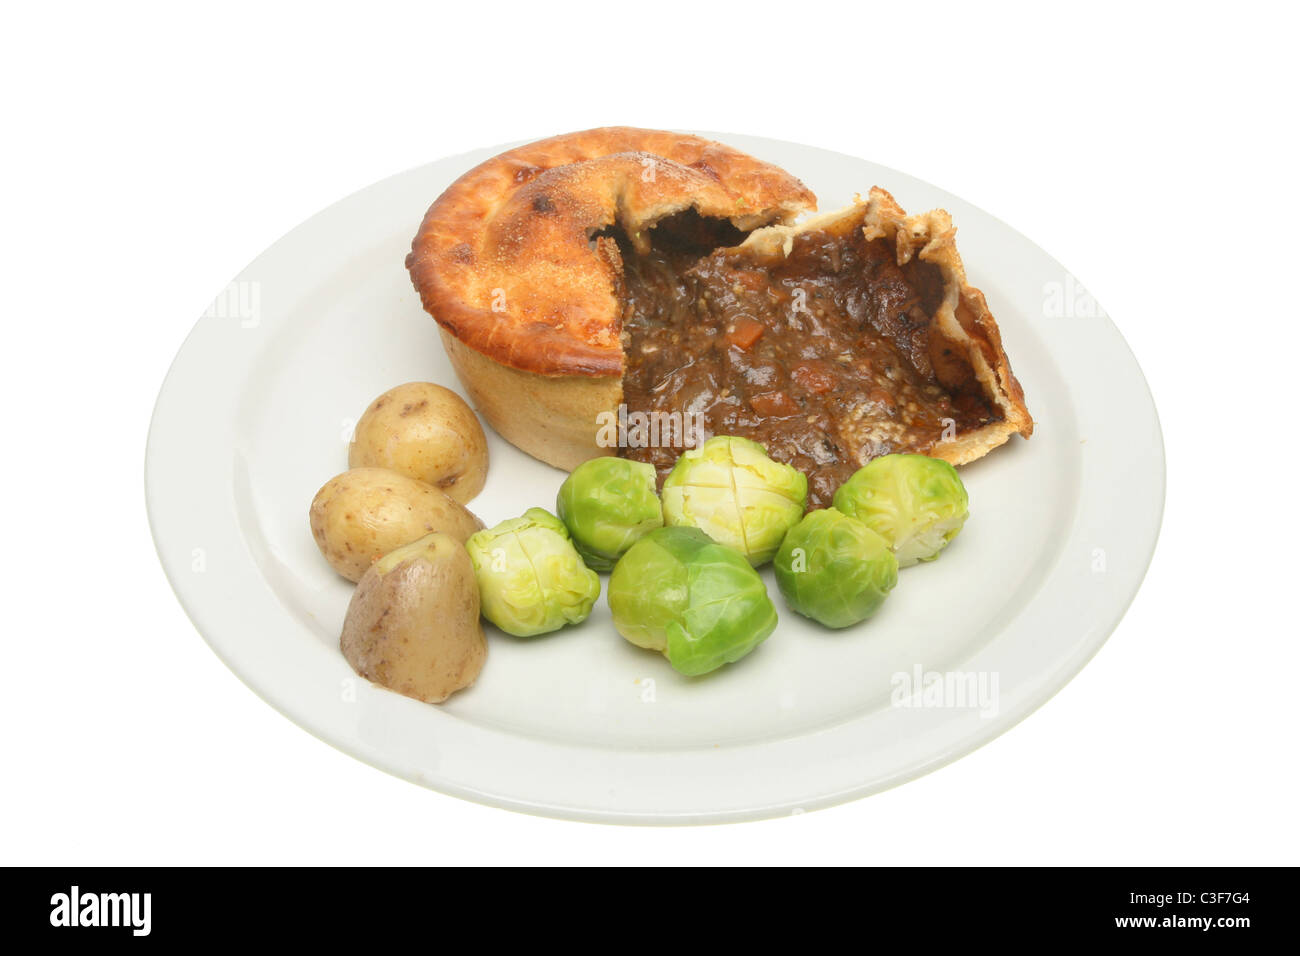 Meat and rich gravy pie with potatoes and brussel sprouts on a plate Stock Photo